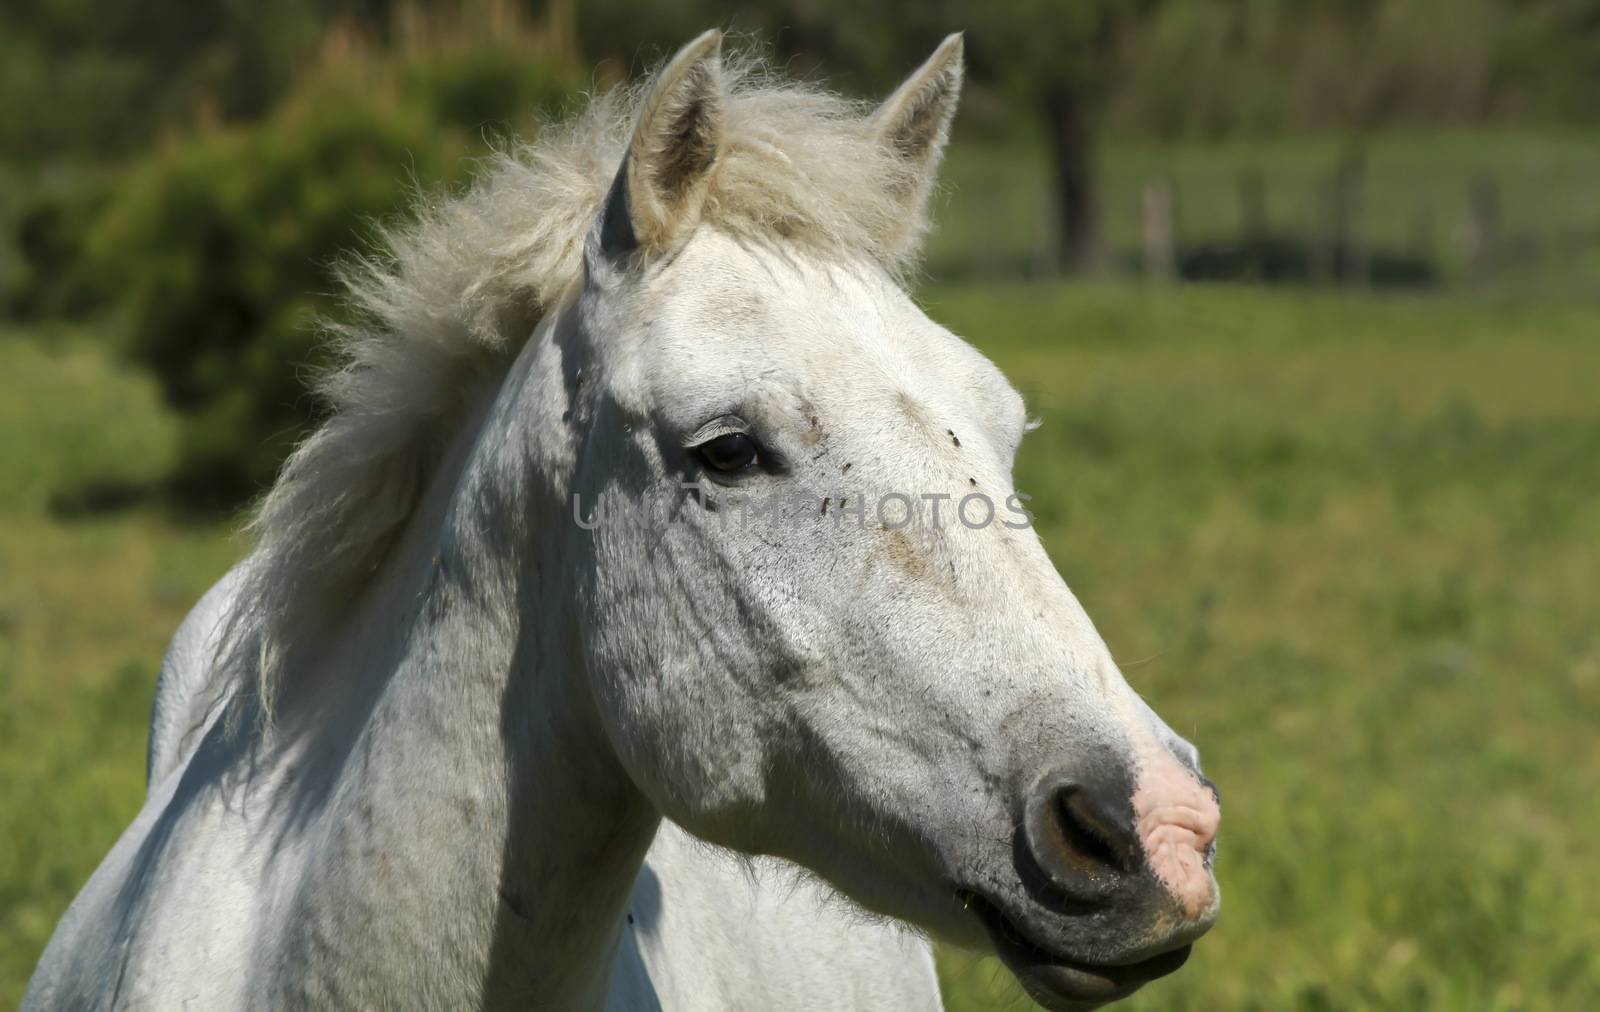 Very beautiful white horse from Camargue in France